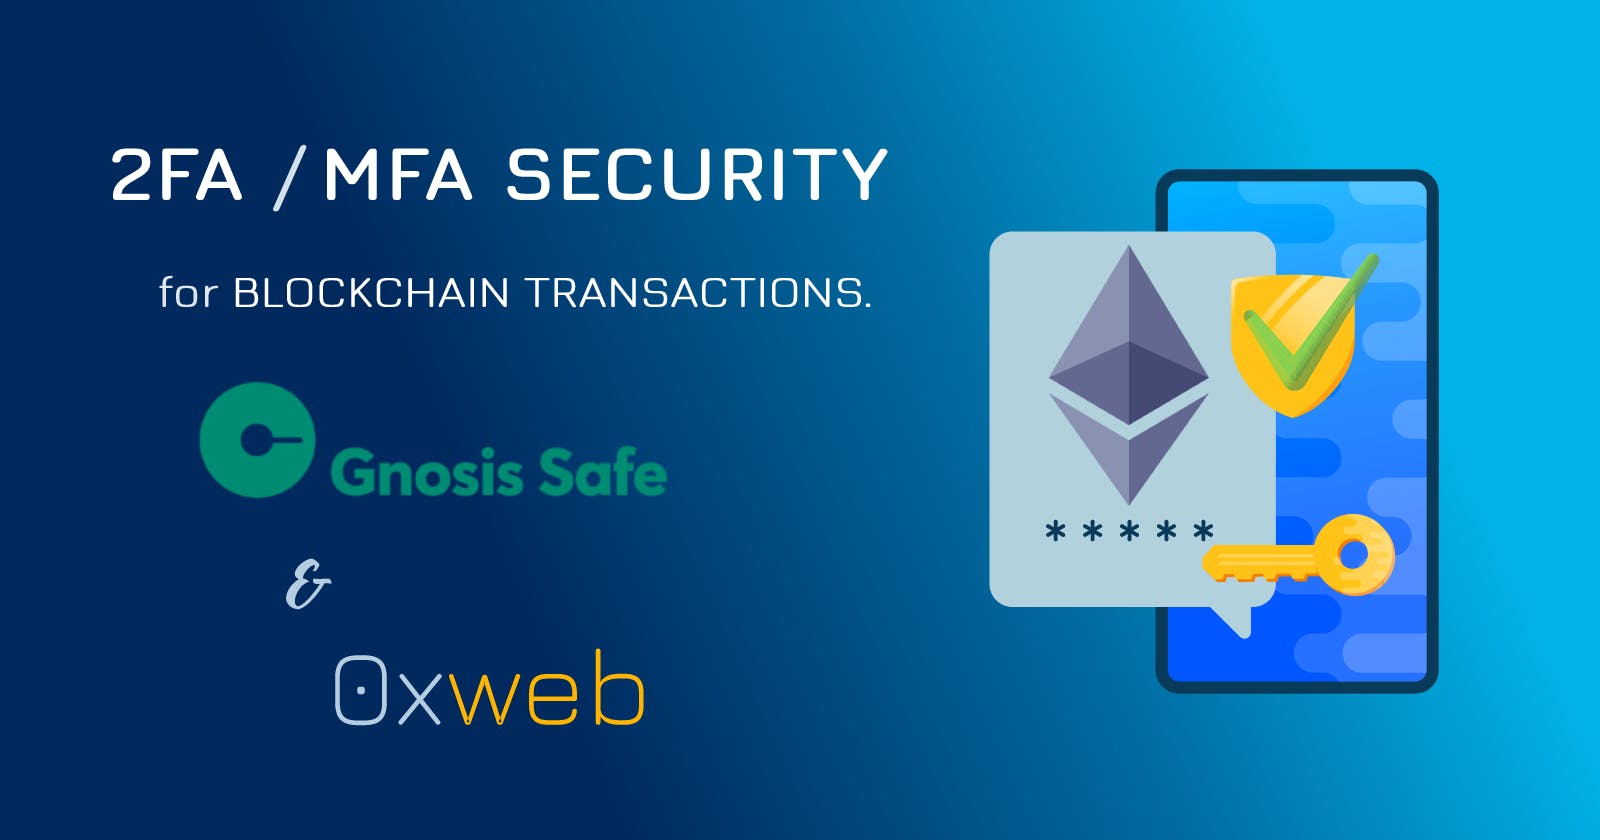 Ethereum: 2FA or Multi-Factor Authentication for transactions